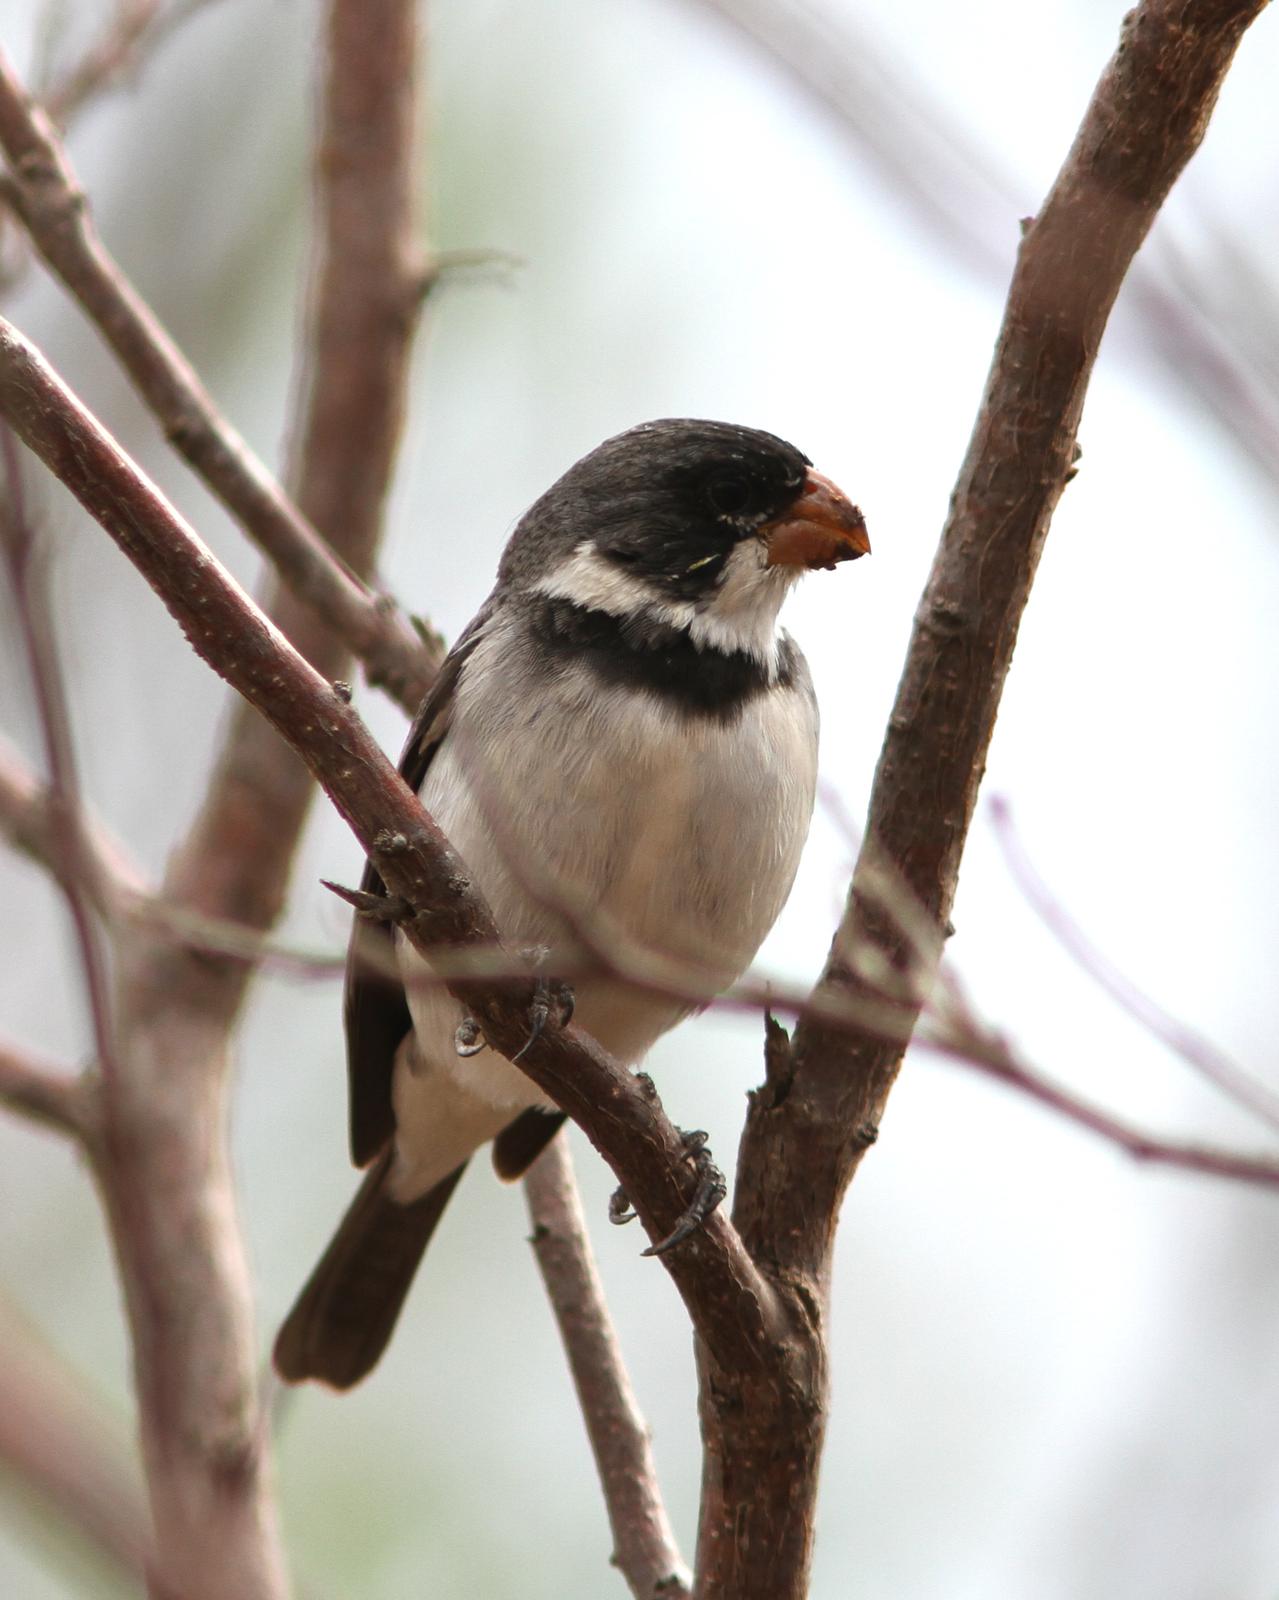 White-throated Seedeater Photo by Marcelo Padua